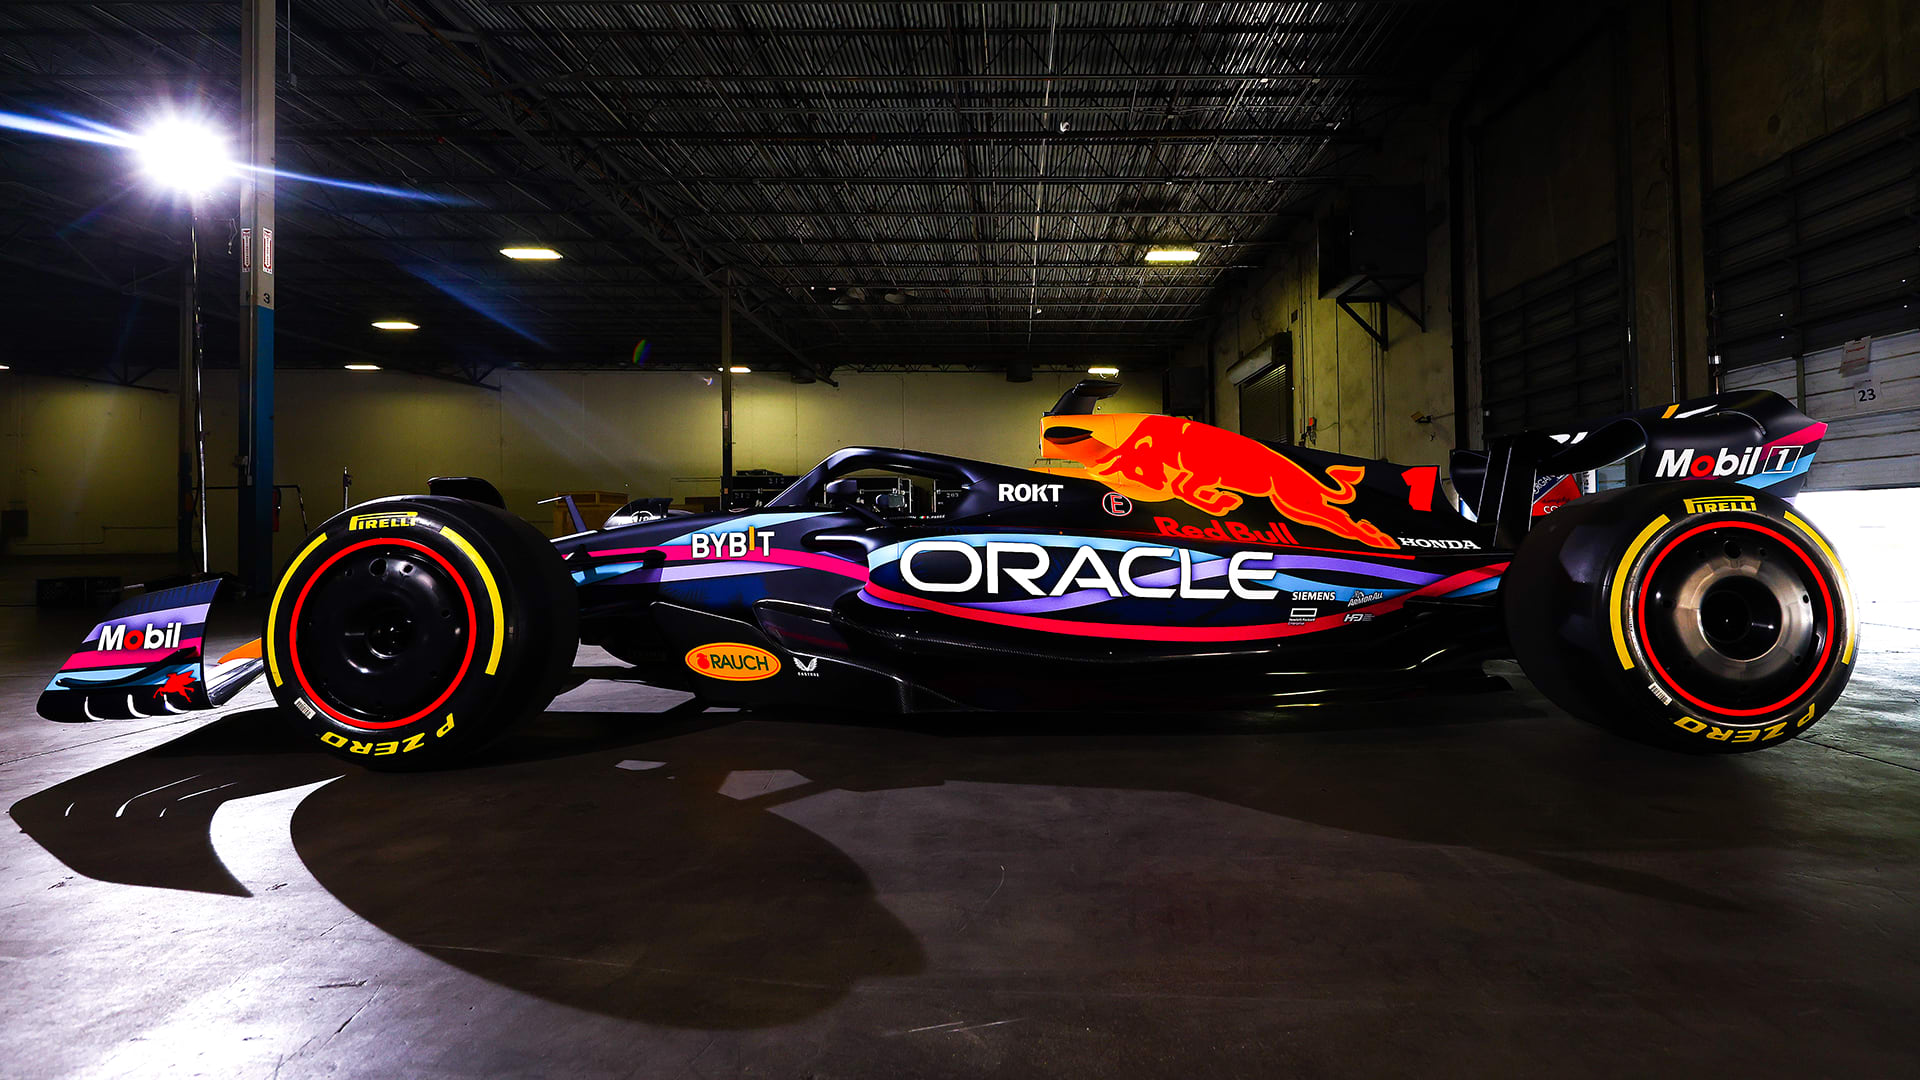 FIRST LOOK Red Bull reveal striking fan-designed livery for Miami Grand Prix Formula 1®